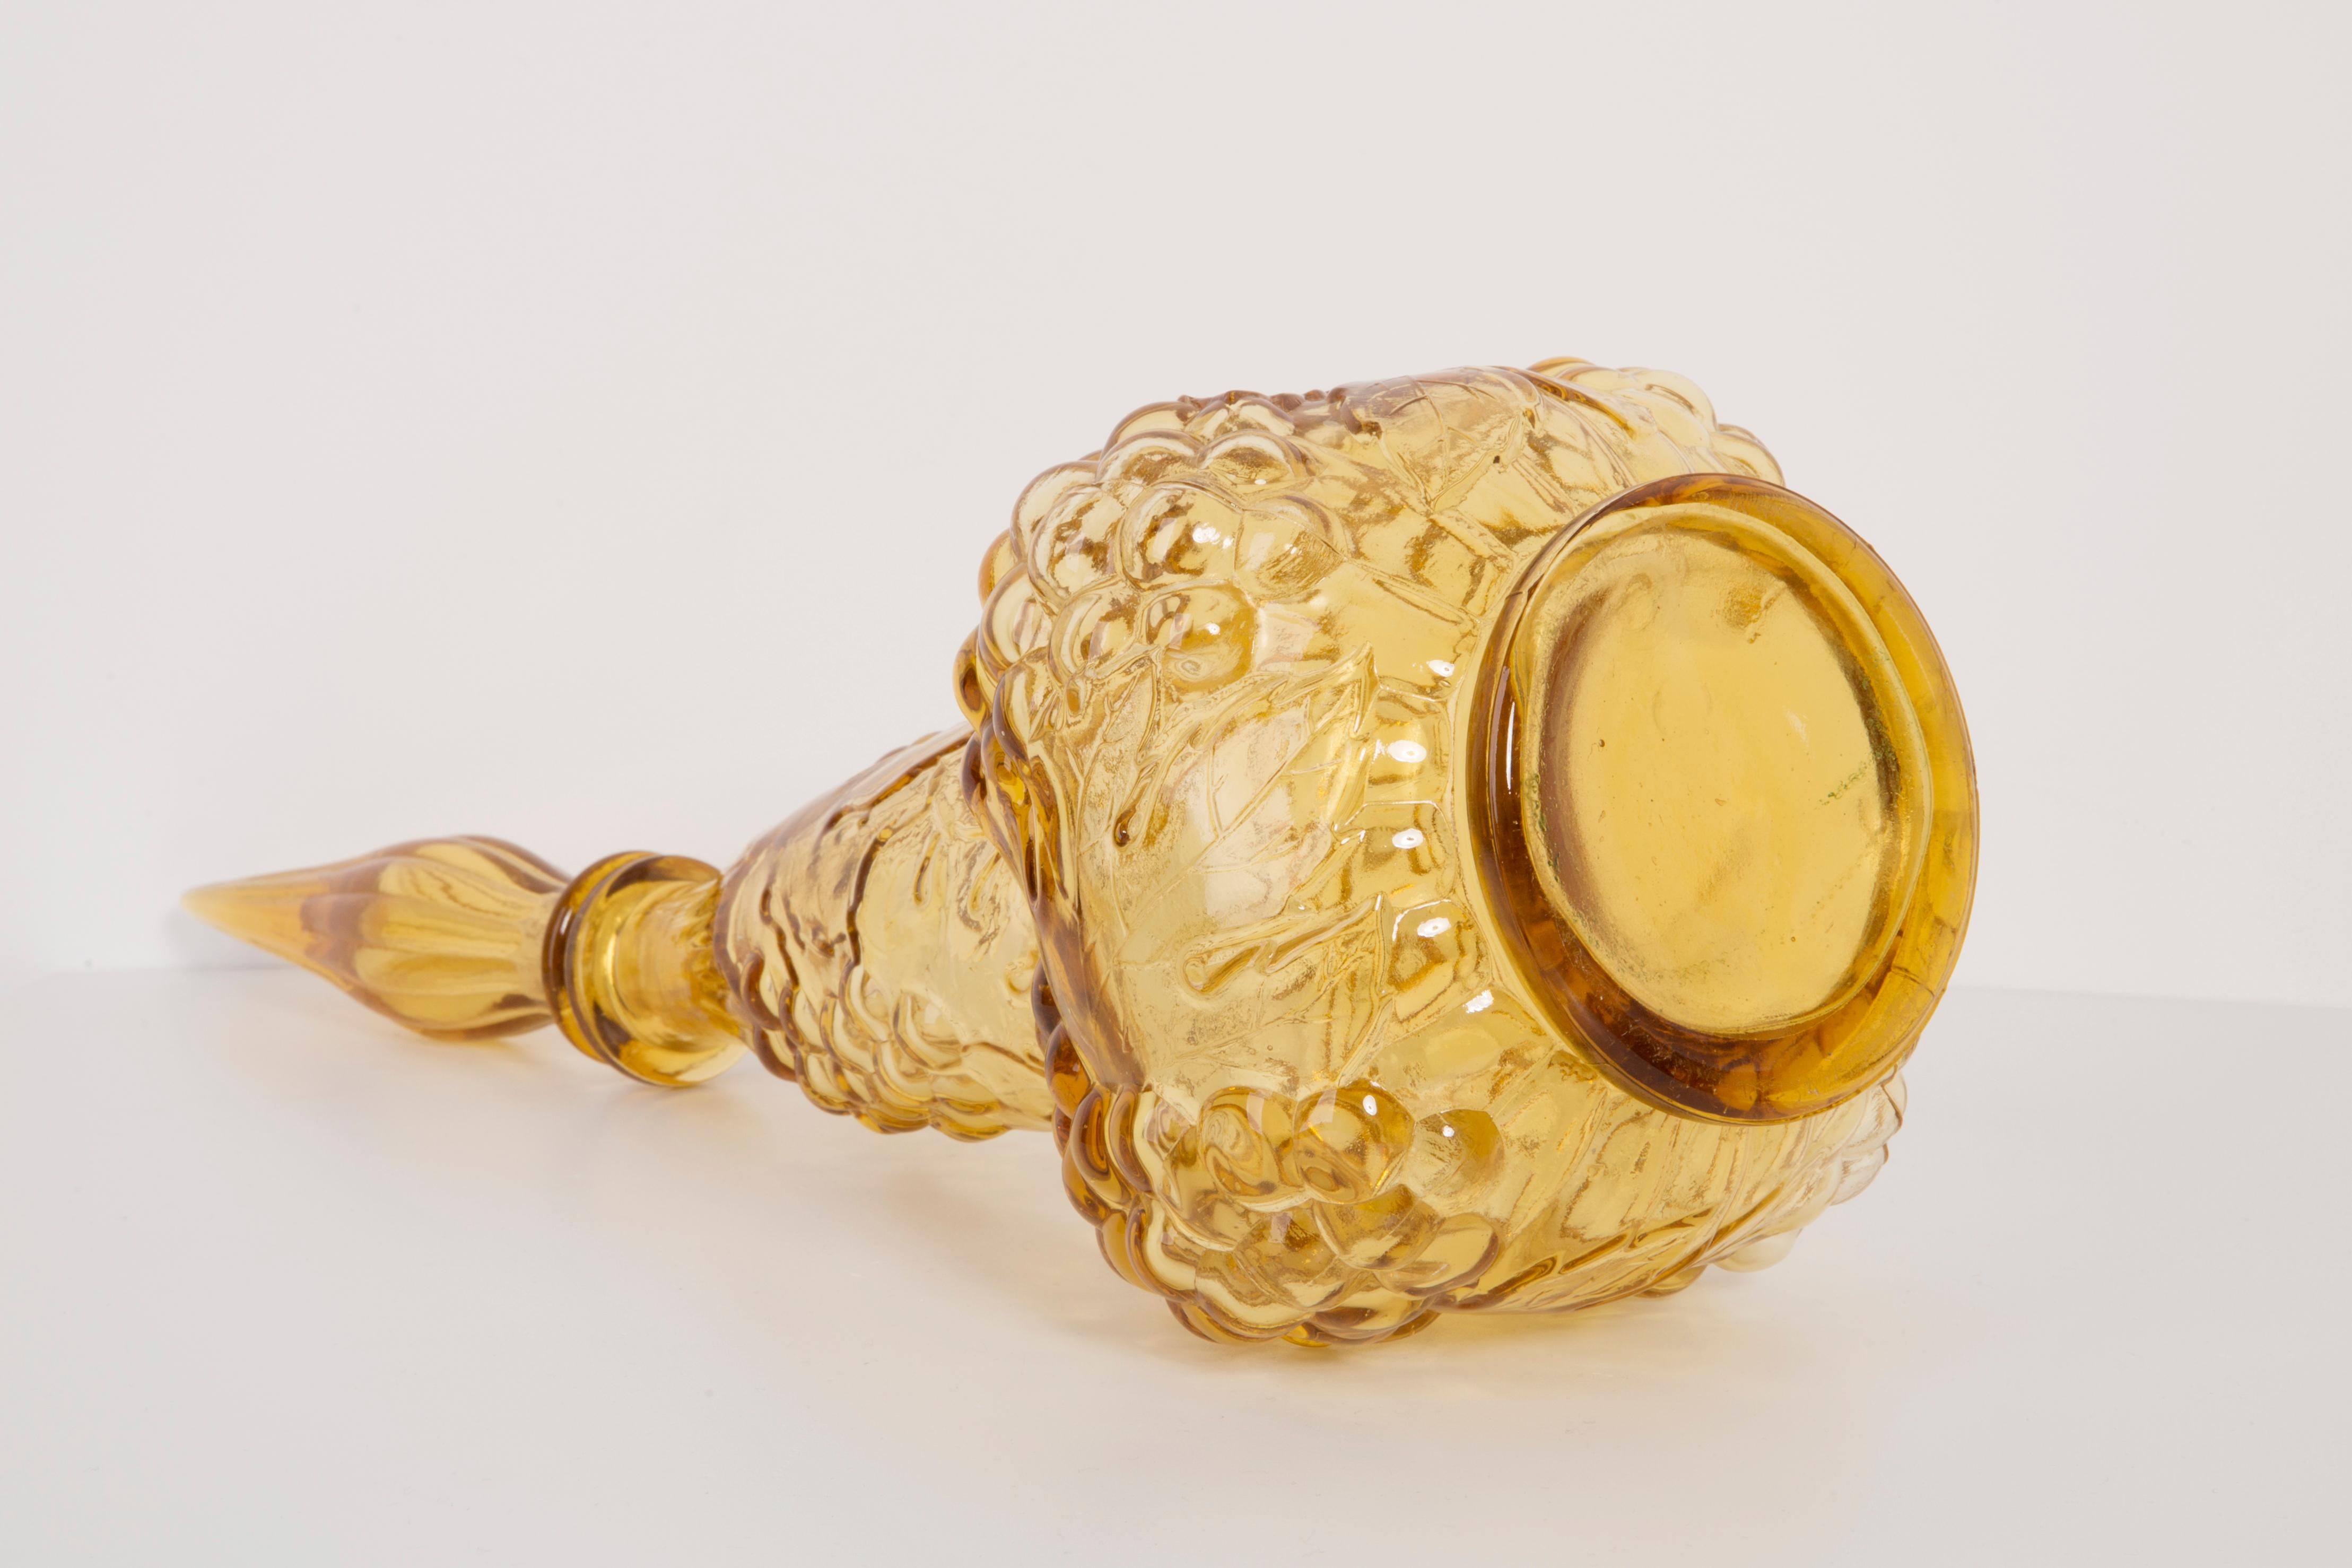 Mid-Century Modern Honey Yellow Glass Genie Decanter with Stopper, 20th Century, Italy, 1960s For Sale